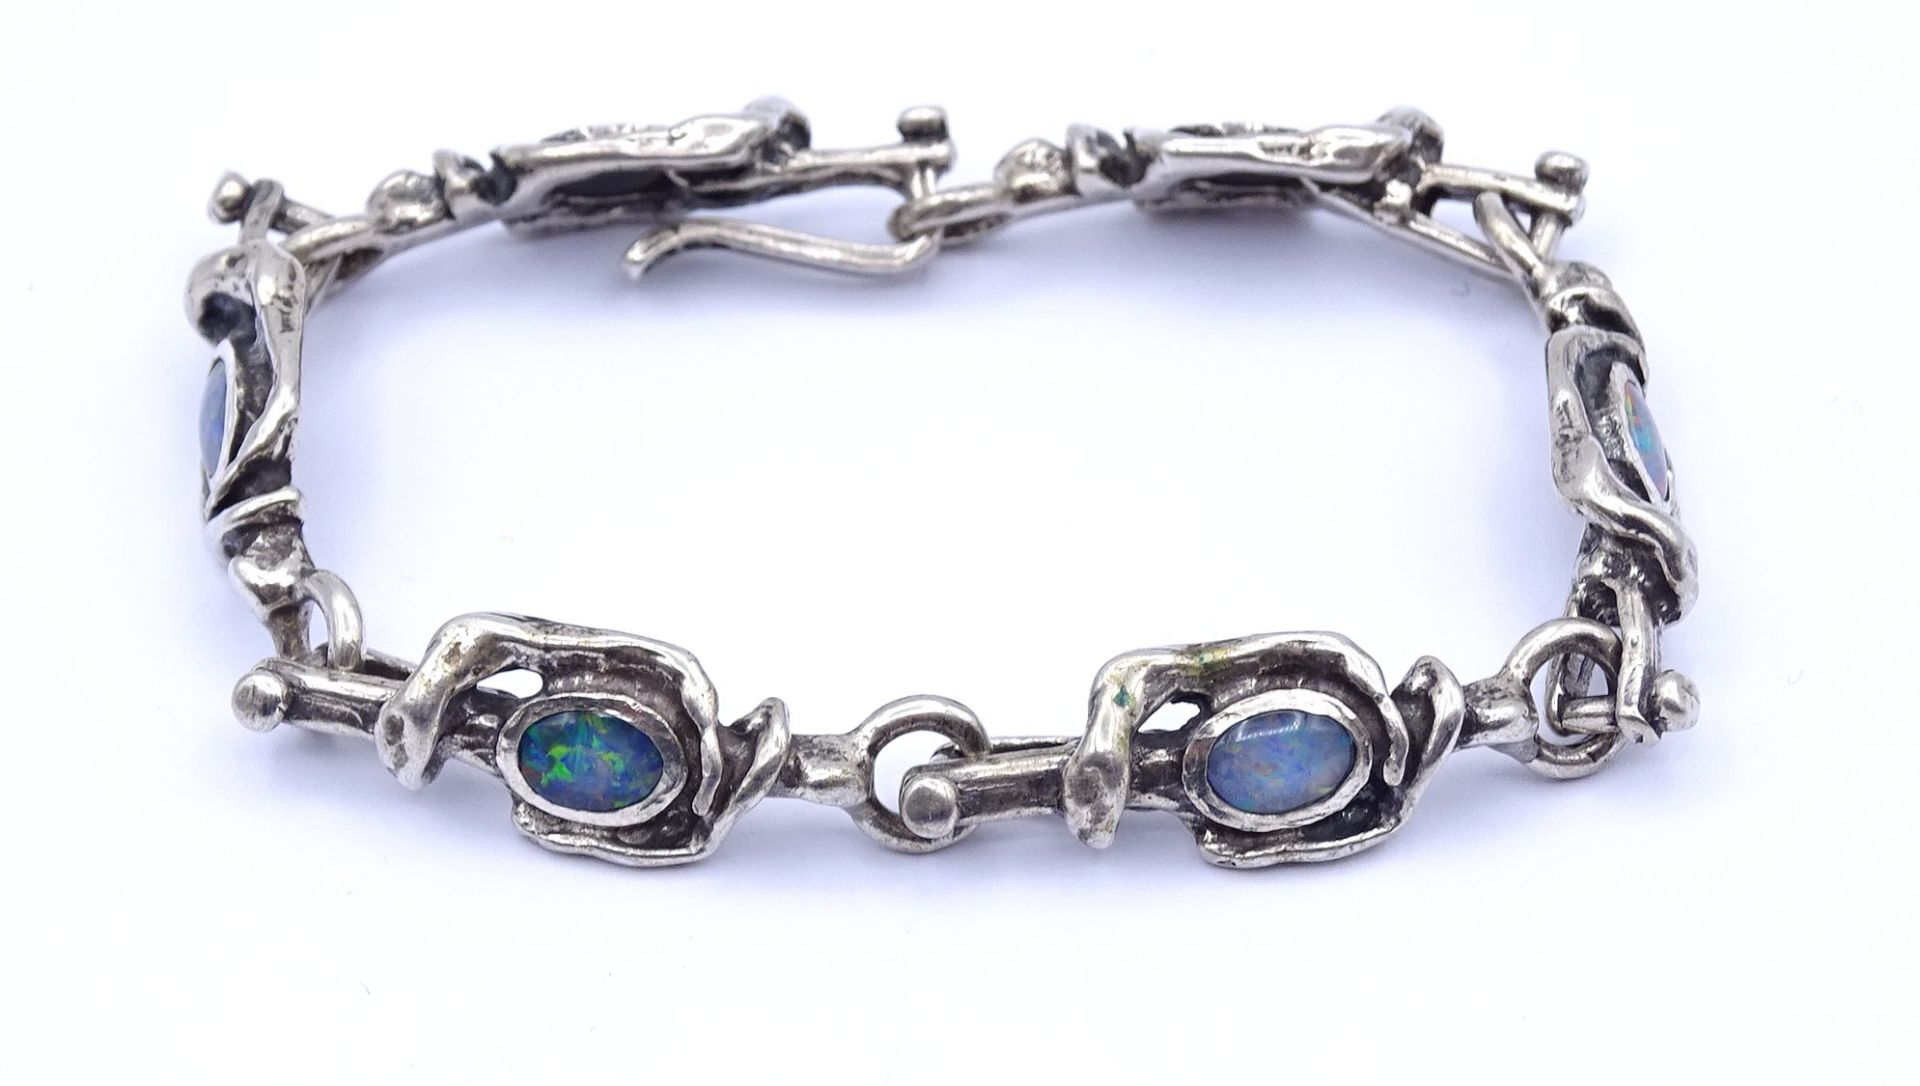 Armband mit 6 Opale, Silber 835/000, L. 19cm, 26g. - Image 2 of 4